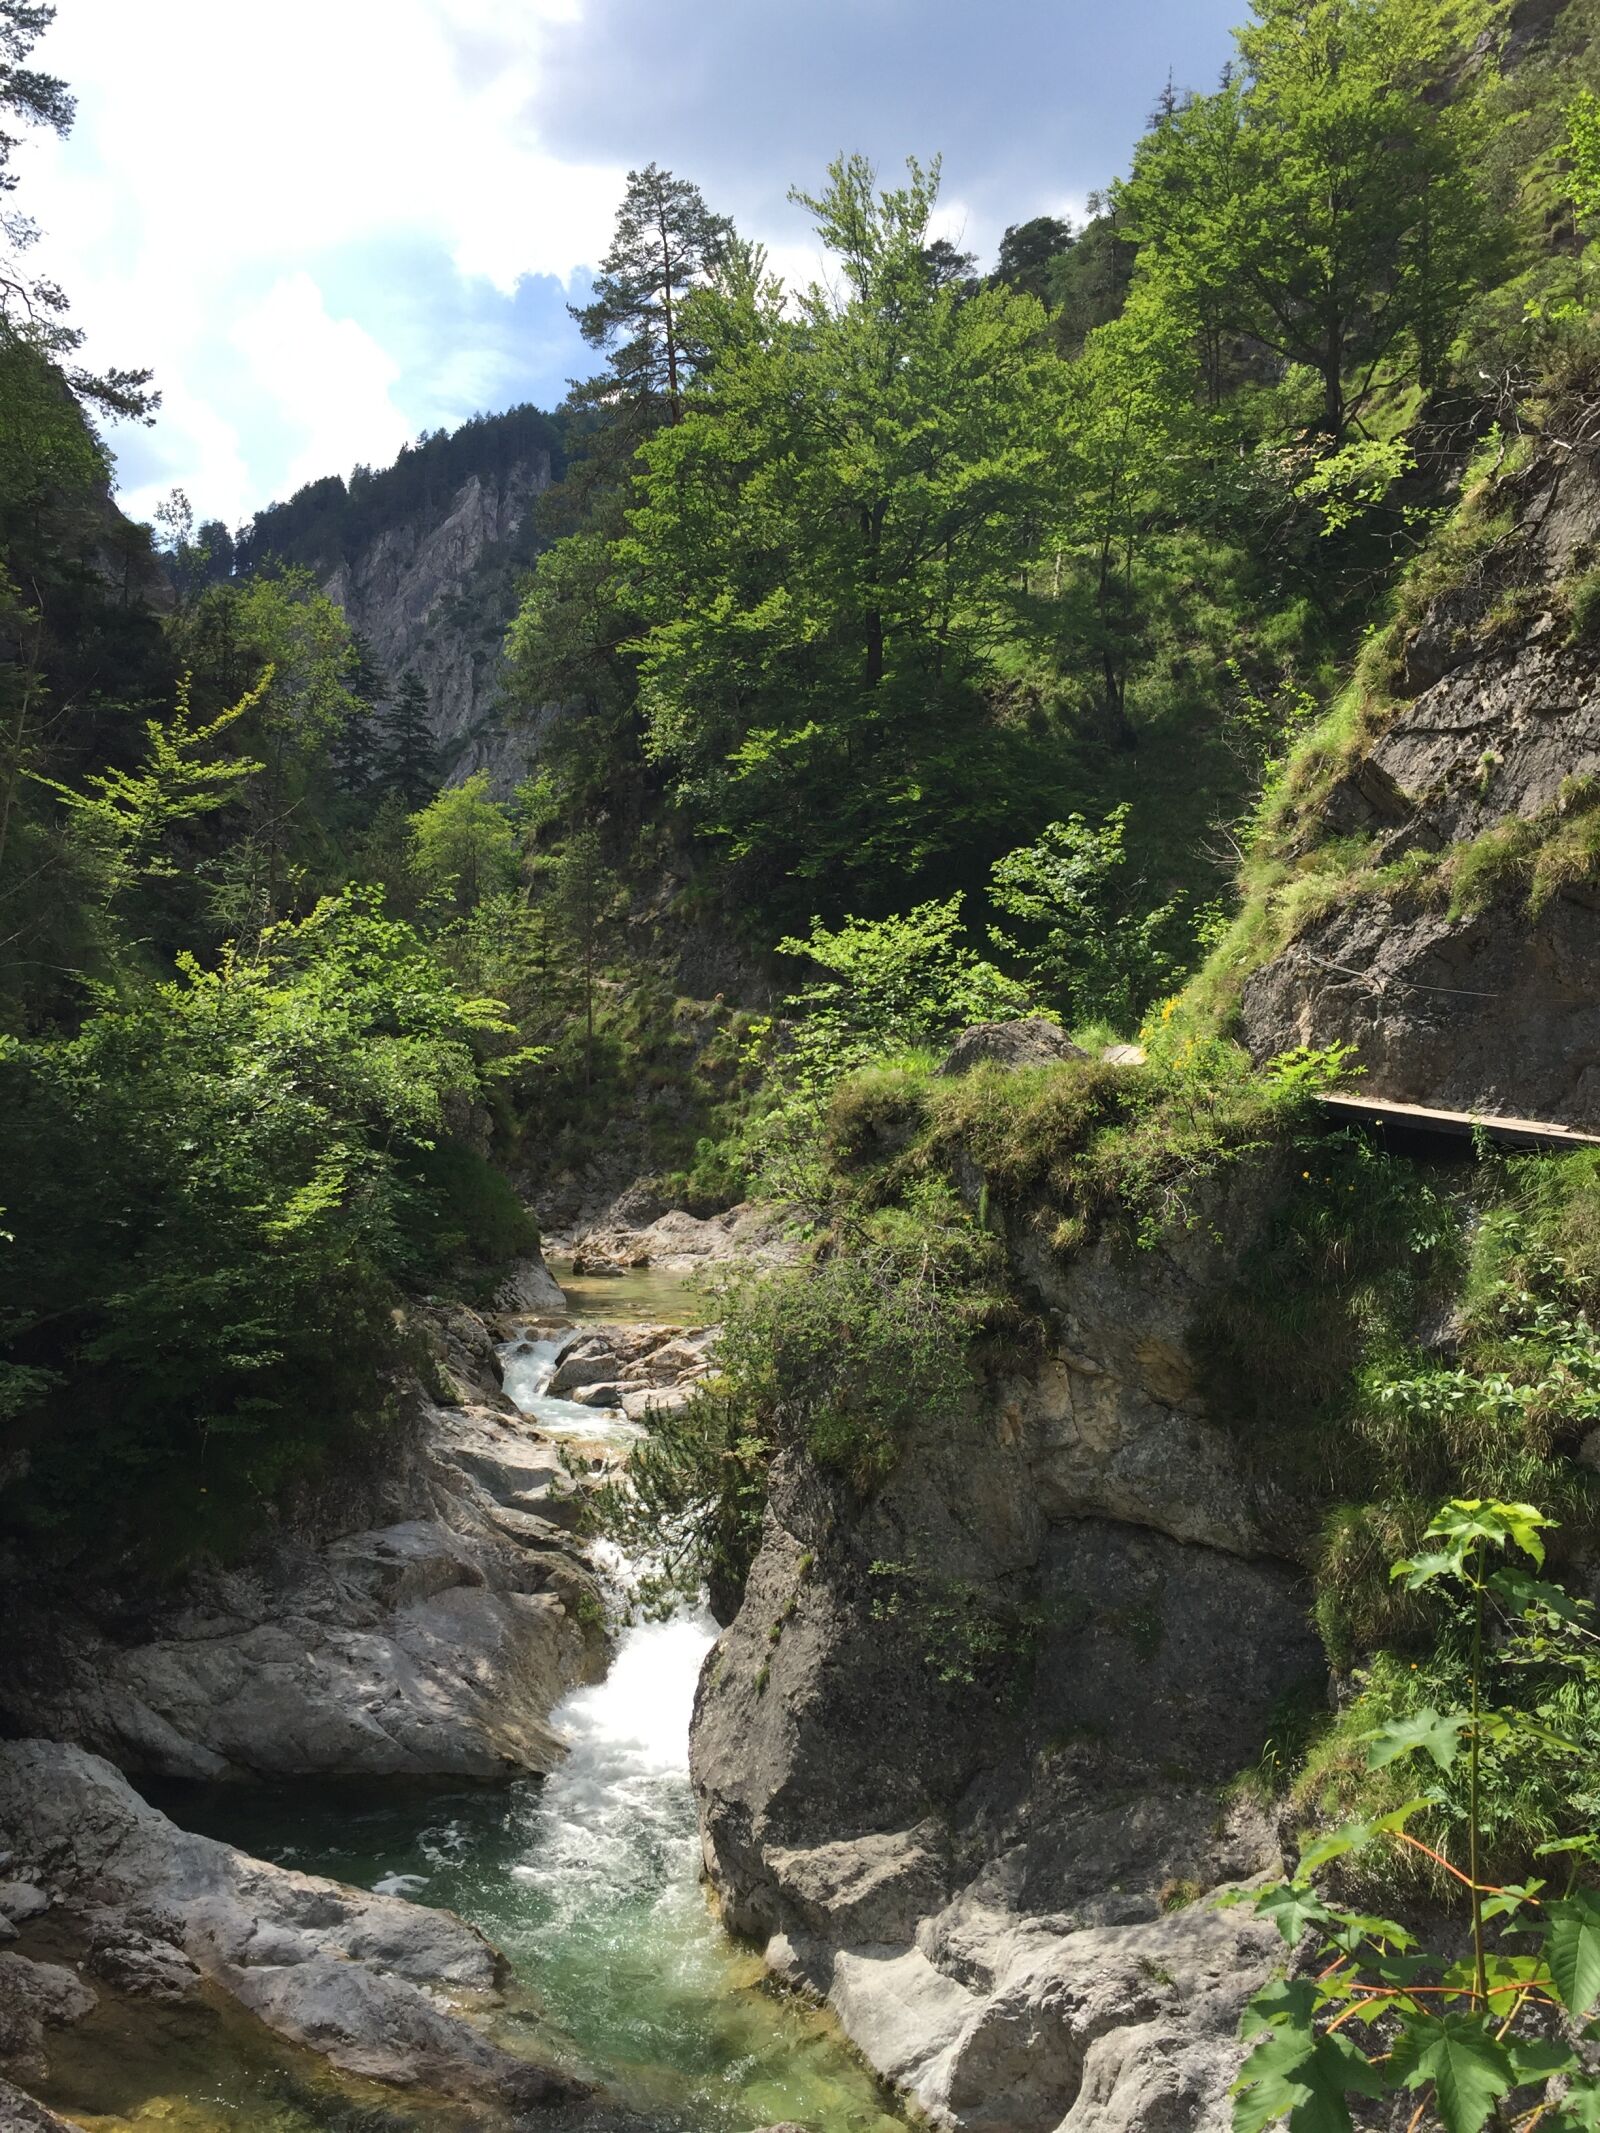 Apple iPhone 6 sample photo. Mountains, spring water, nature photography